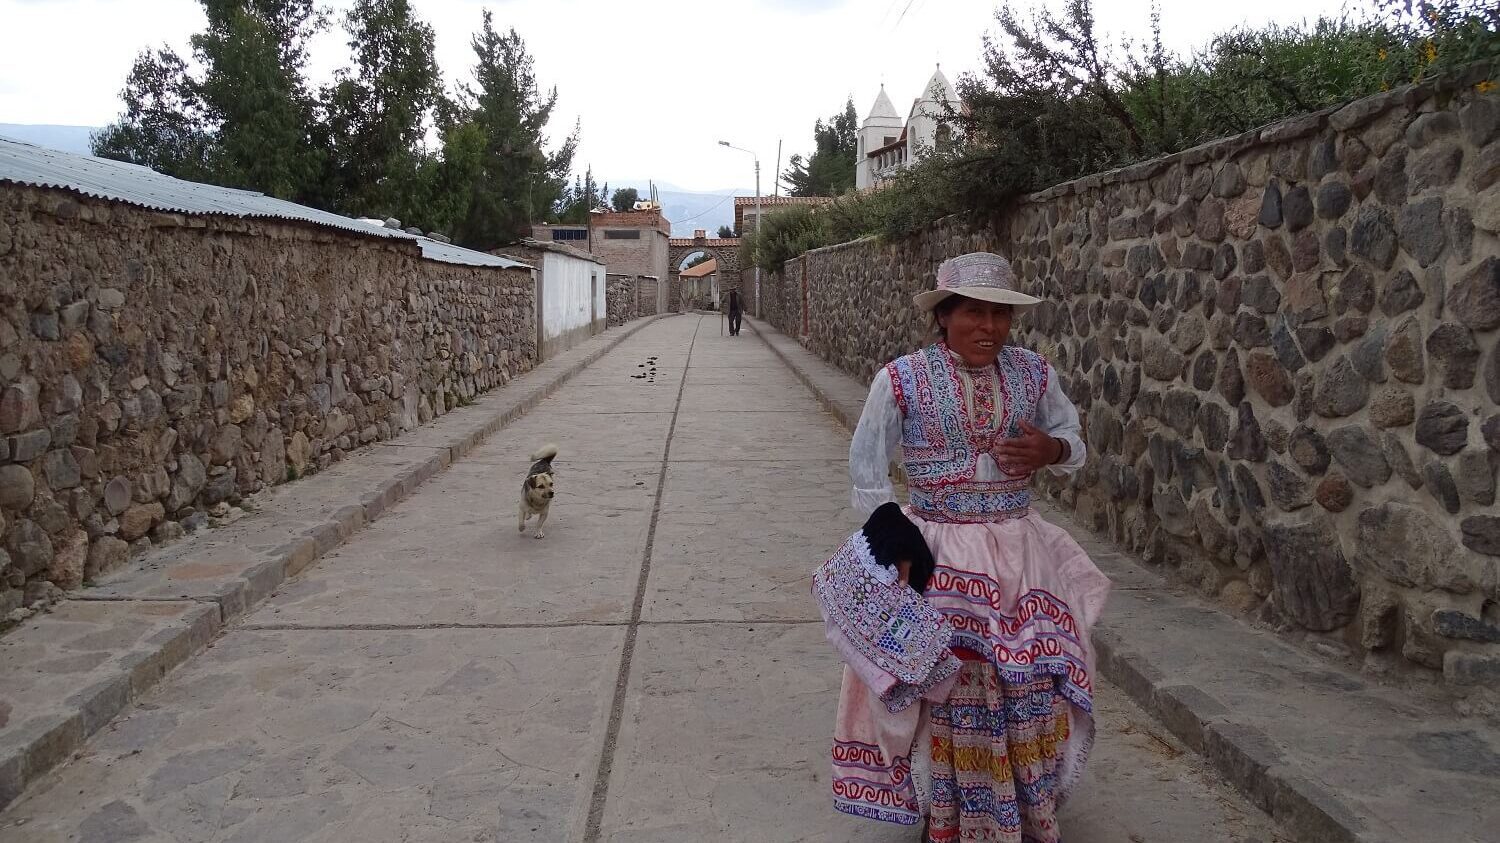 Amanda from Coporaque walking in the streets of her community Coporaque, in the Colca Canyon | RESPONSible Travel Peru